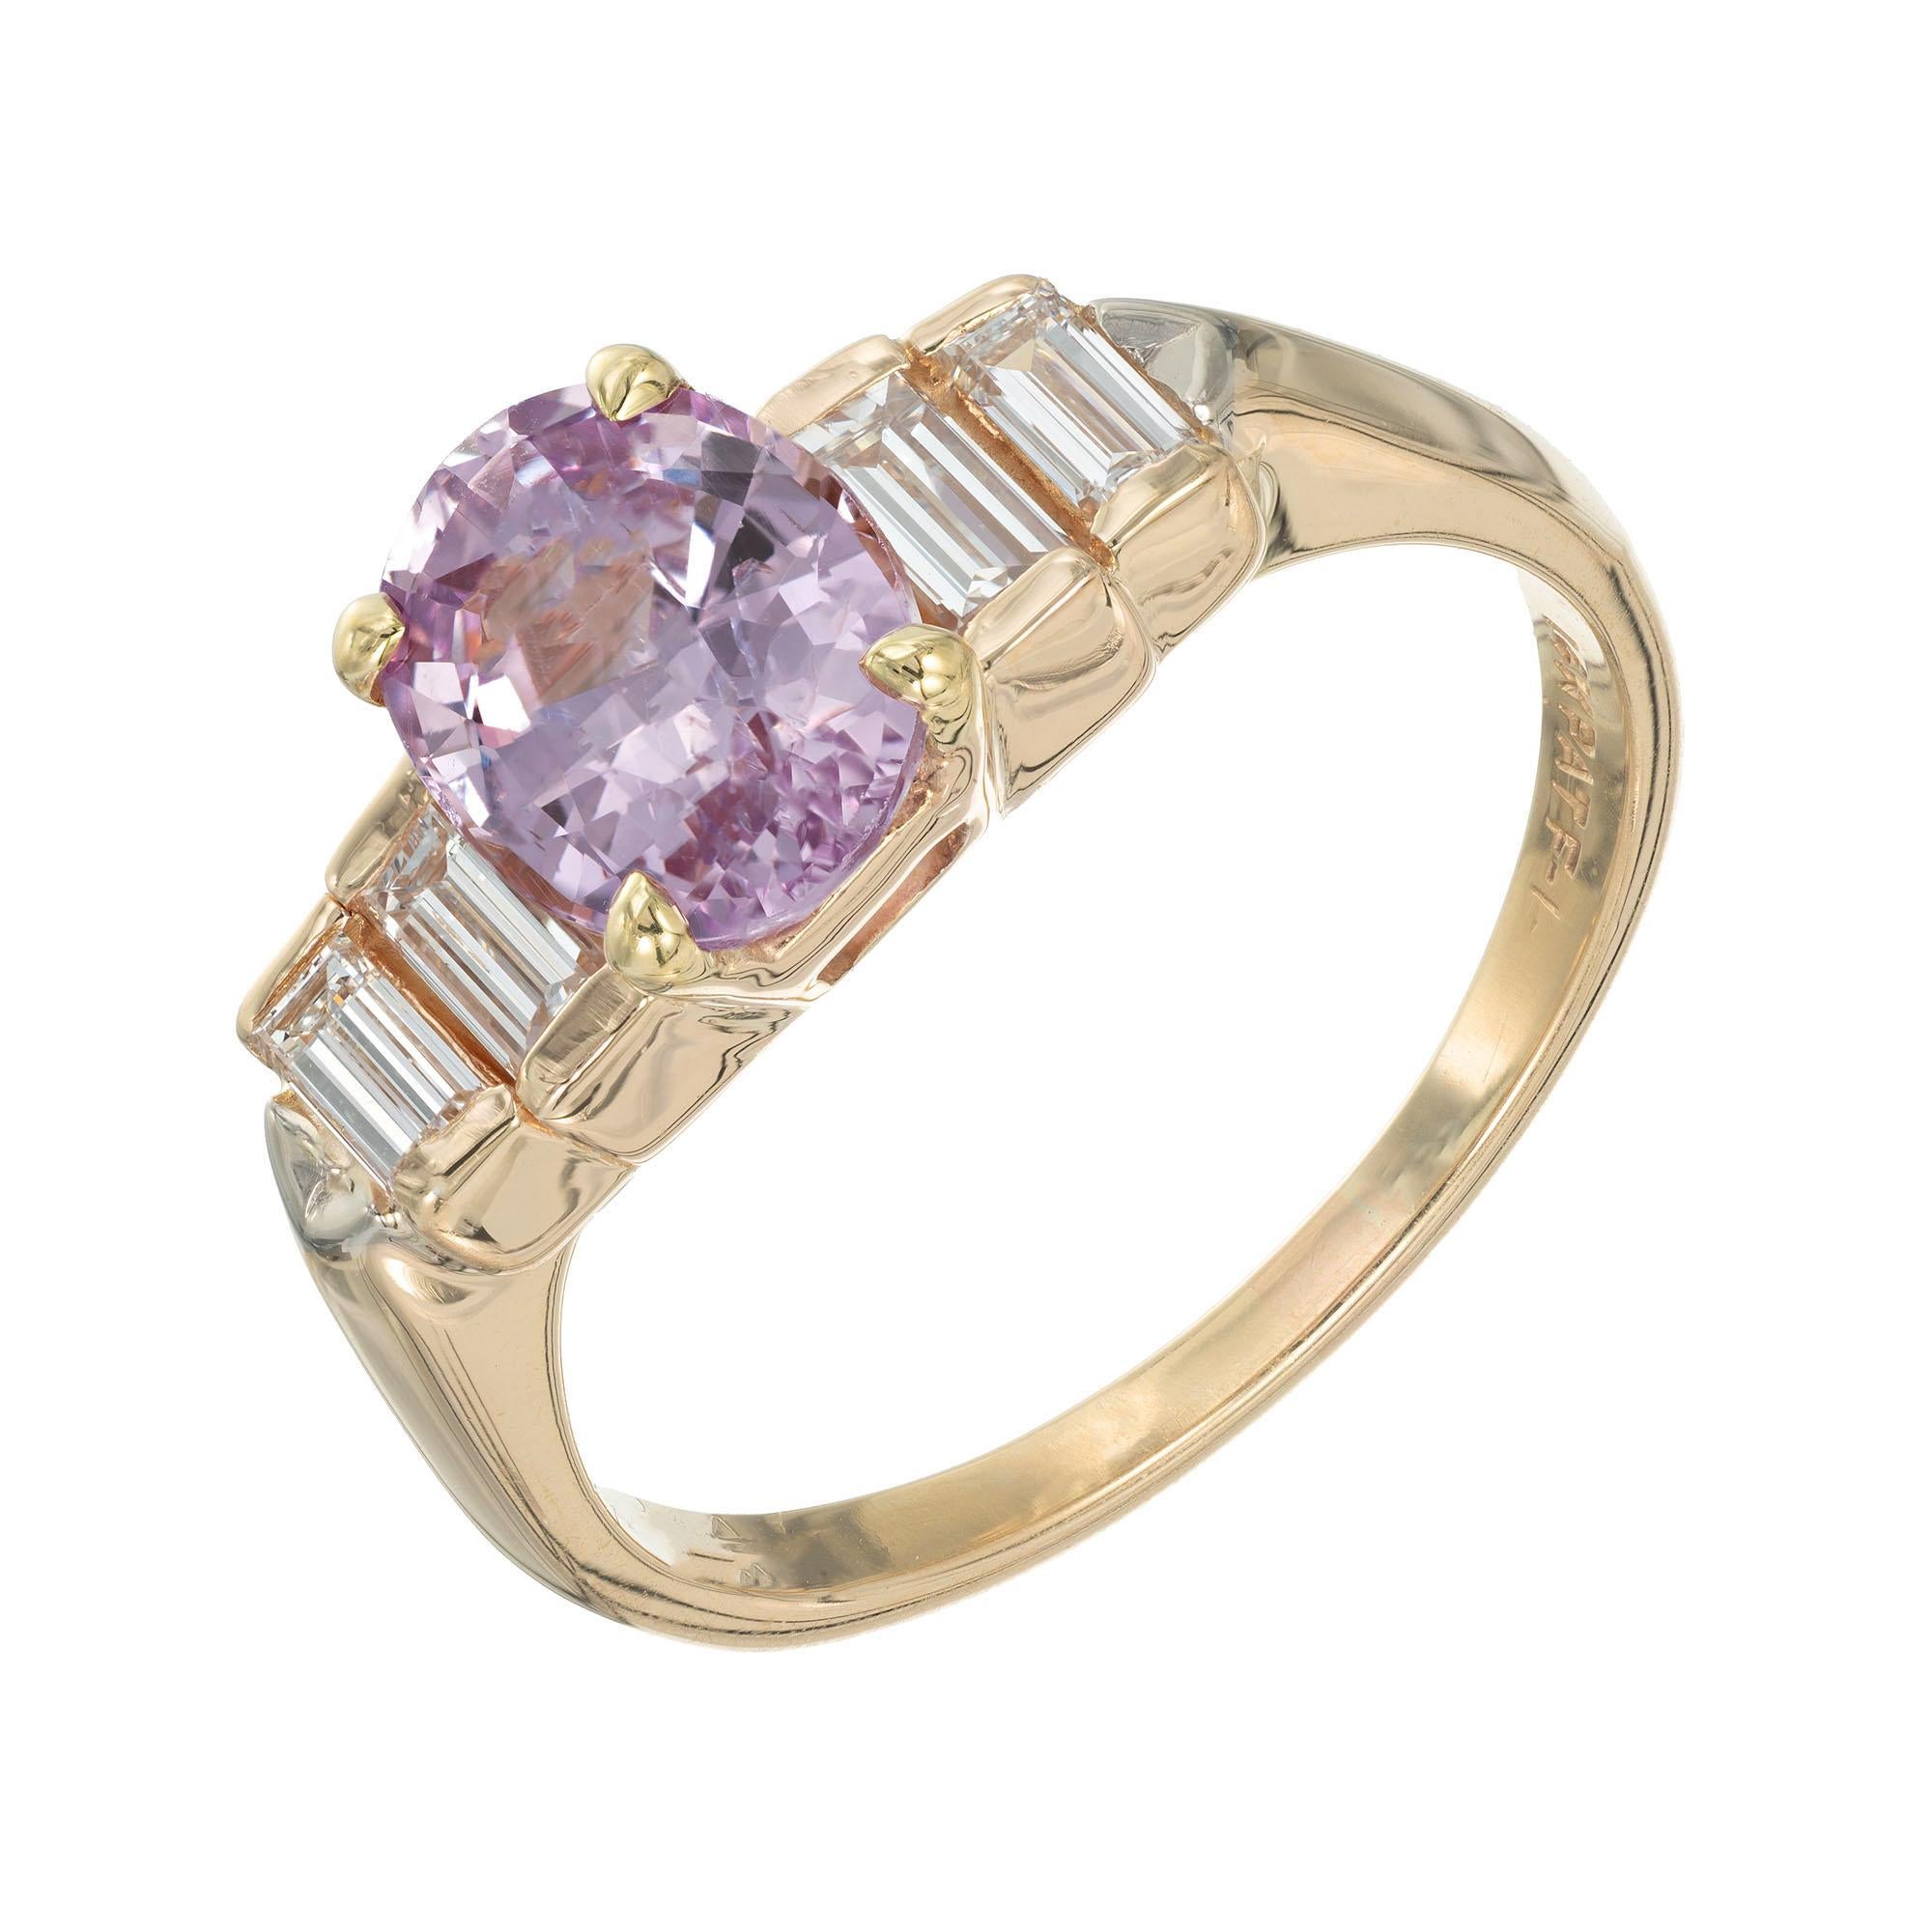 1960’s sapphire an diamond engagement ring. GIA certified oval sapphire center stone with baguette side stones in a 14k yellow gold setting. 

1 oval pink-purple sapphire MI, approx. 1.84cts GIA Certificate # 6203642916
4 straight cut baguette